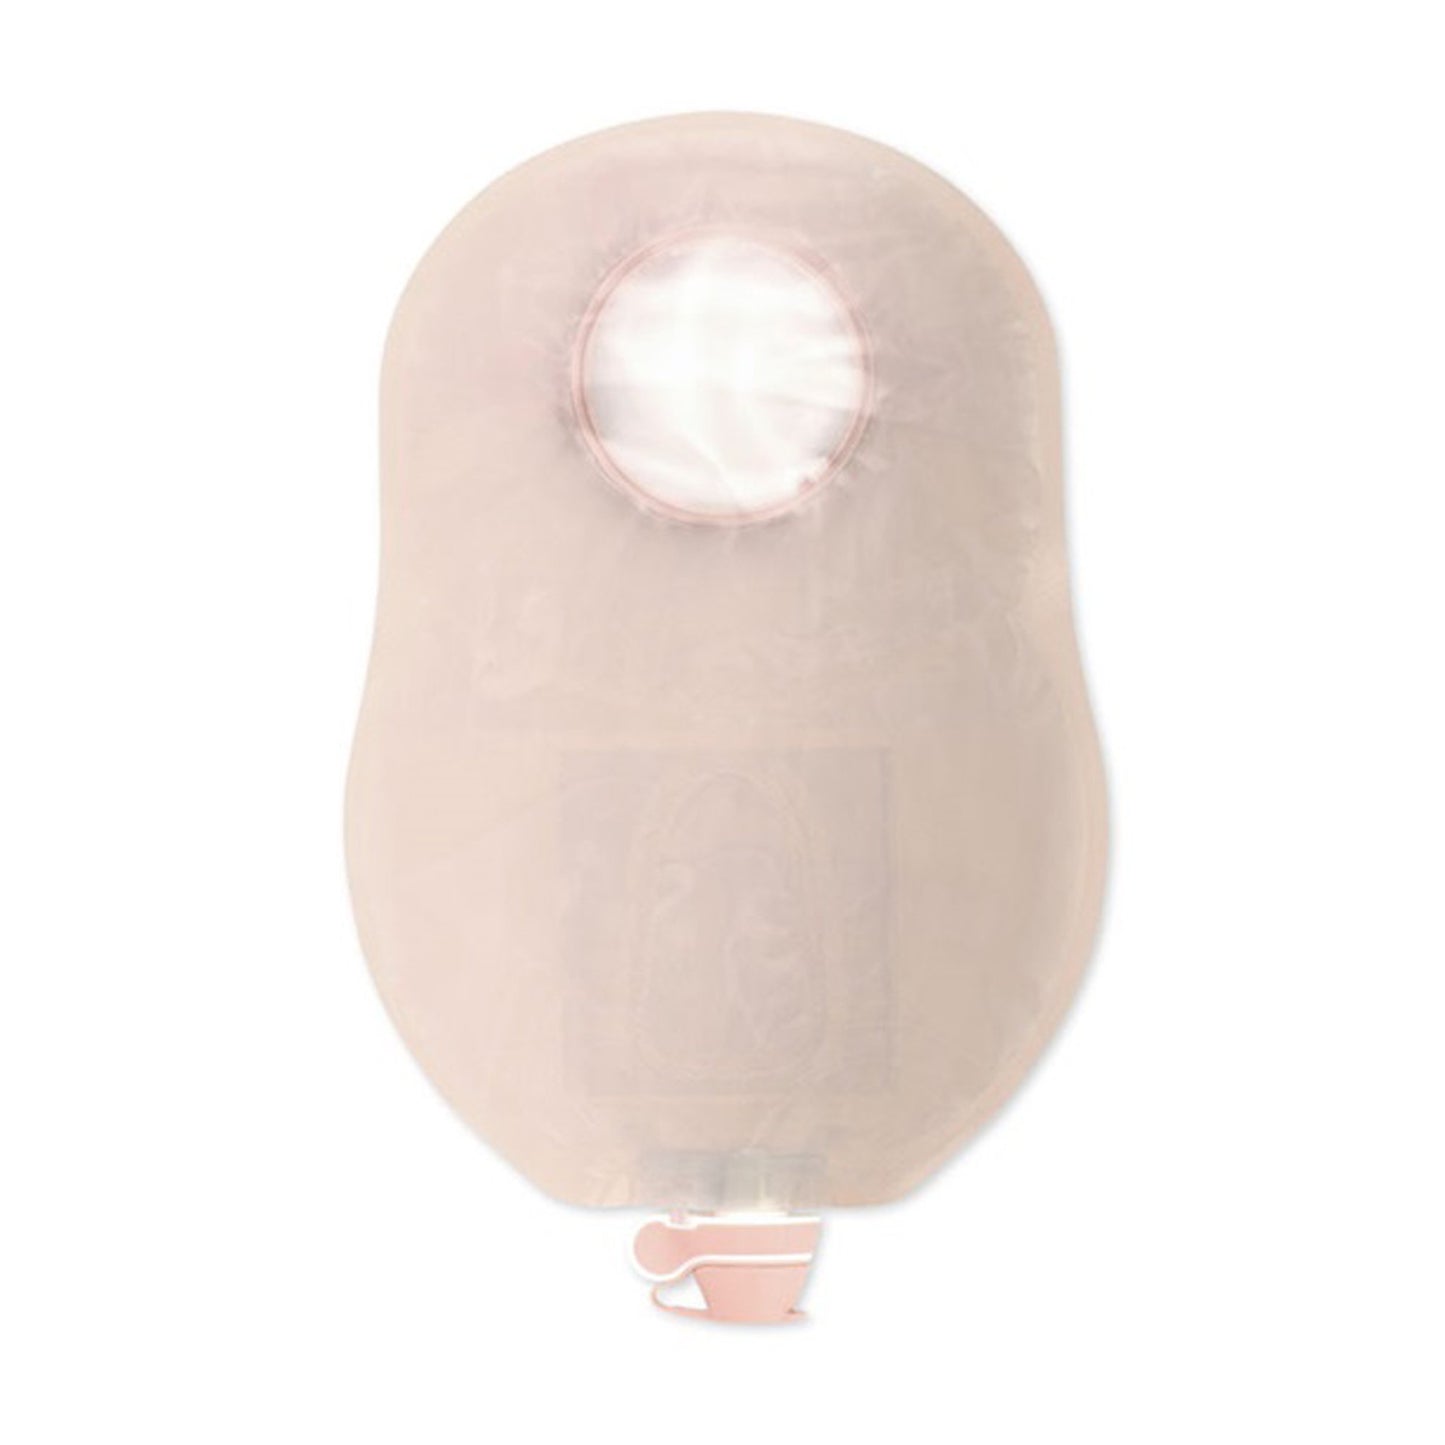 New Image™ Two-Piece Ultra-Clear Urostomy Pouch, 9 Inch Length, 1.75 Inch Flange, 10 ct